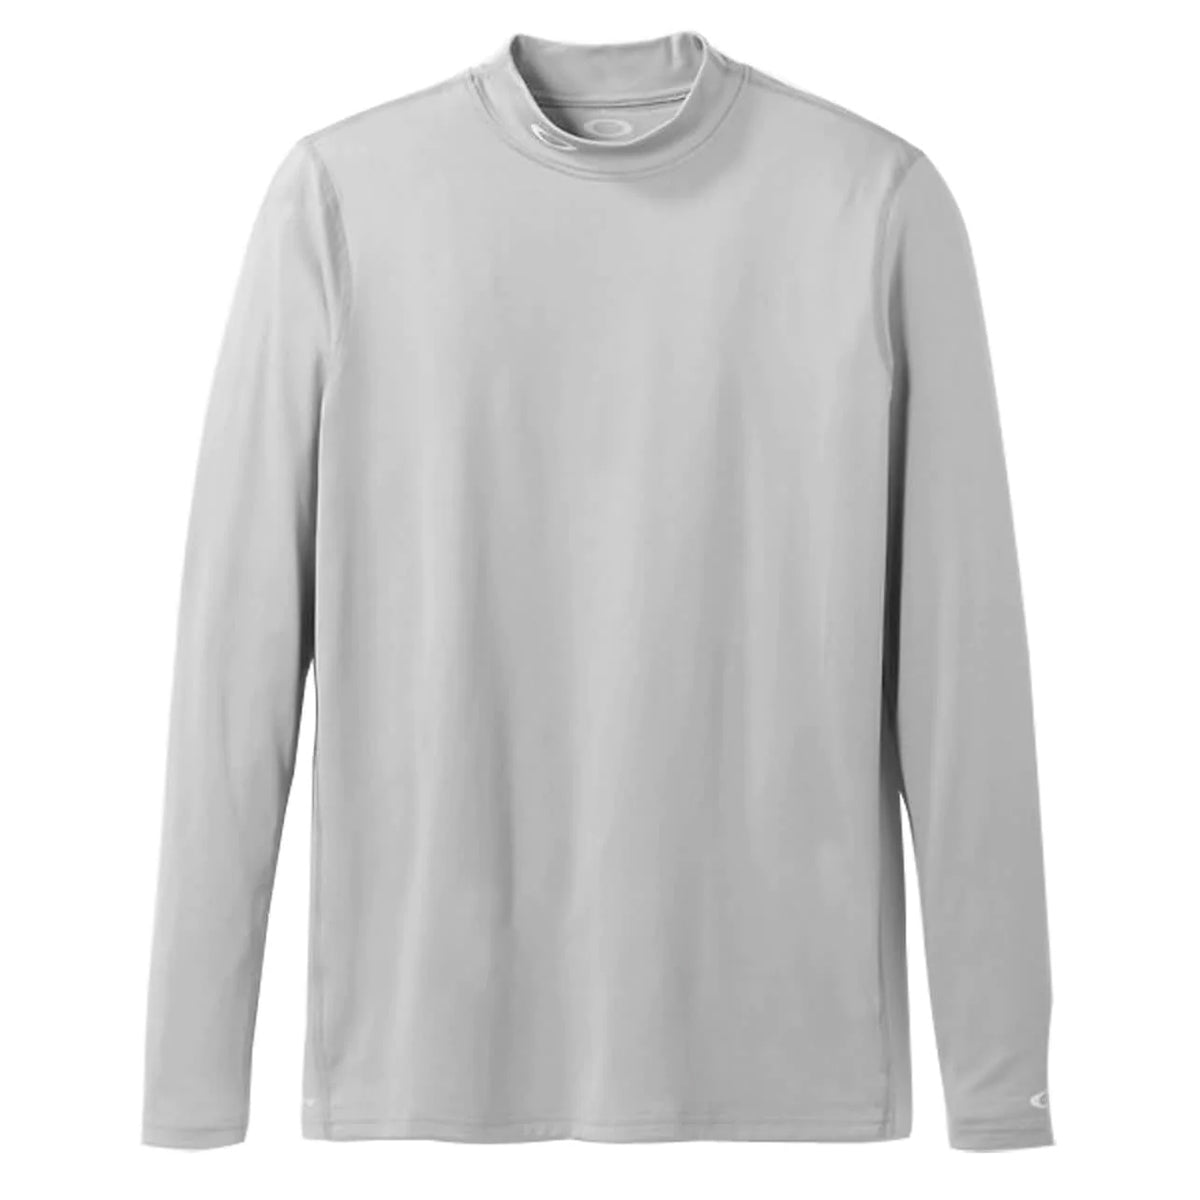 Oakley Lay A Patch Men's Long-Sleeve Shirts